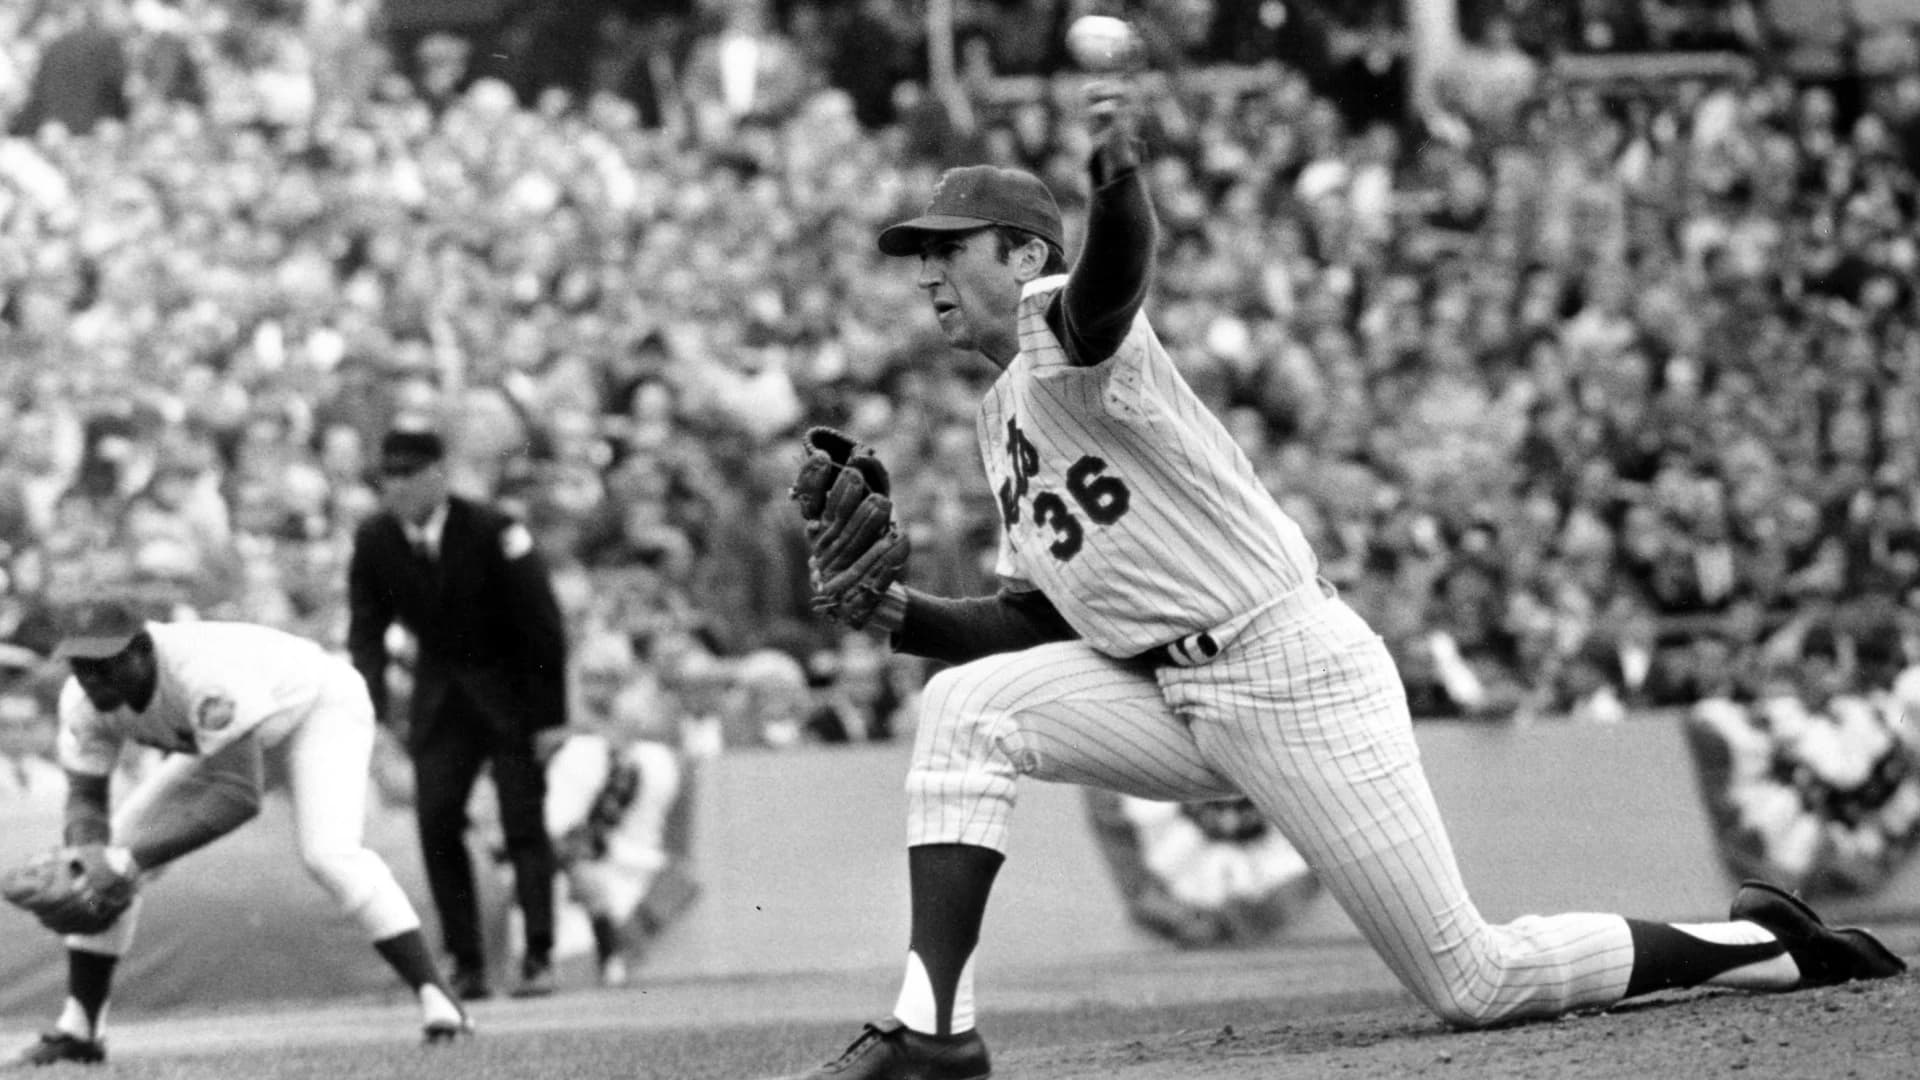 Jerry Koosman's No. 36 to be retired by Mets in June